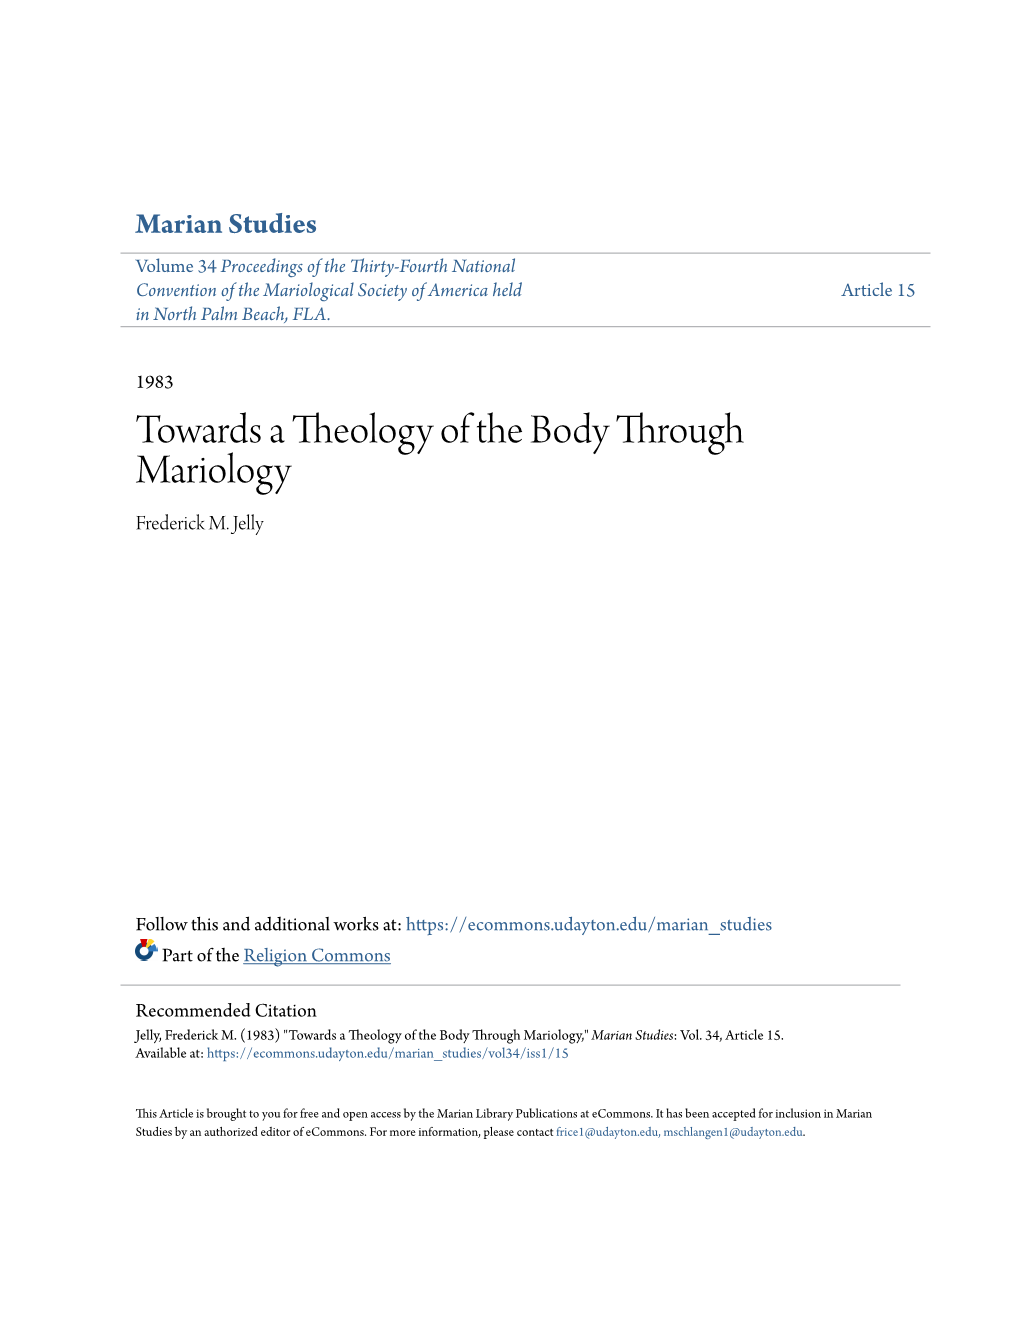 Towards a Theology of the Body Through Mariology Frederick M